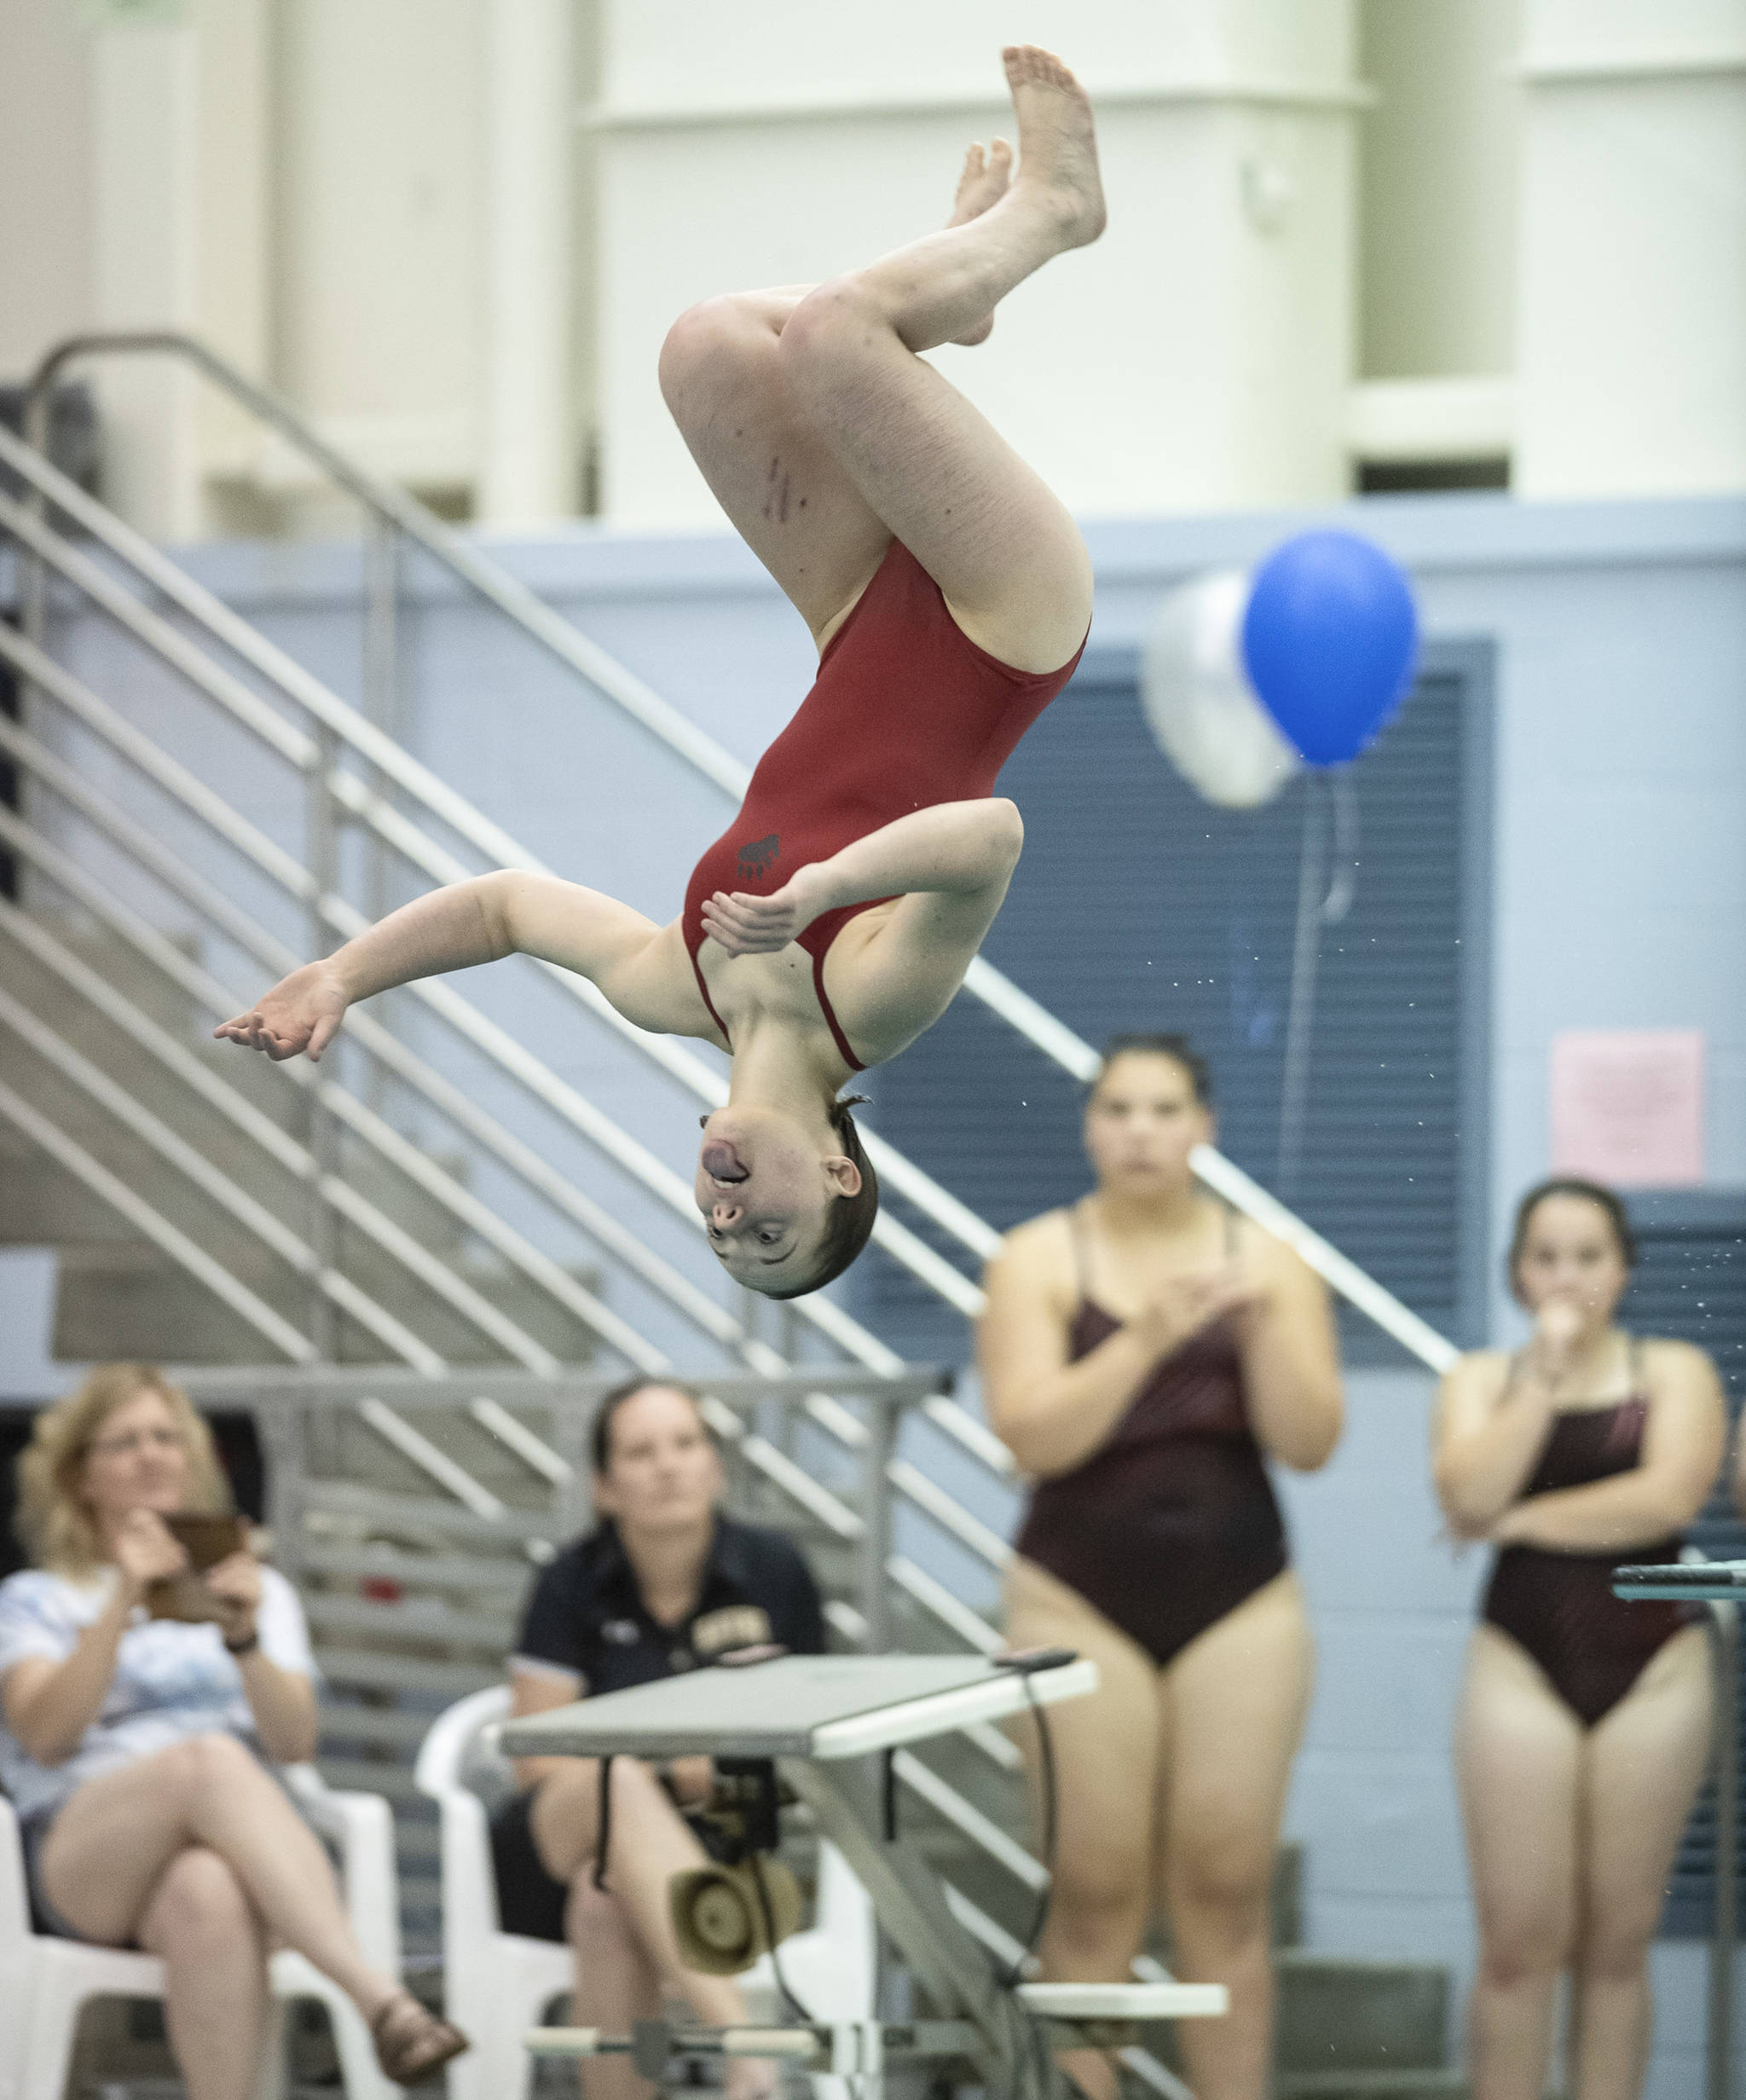 Juneau-Douglas’ Gabby Brown competes in the diving event at the Juneau Invitational Swim Meet at the Dimond Park Aquatic Center on Friday, Sept. 20, 2019. (Michael Penn | Juneau Empire)